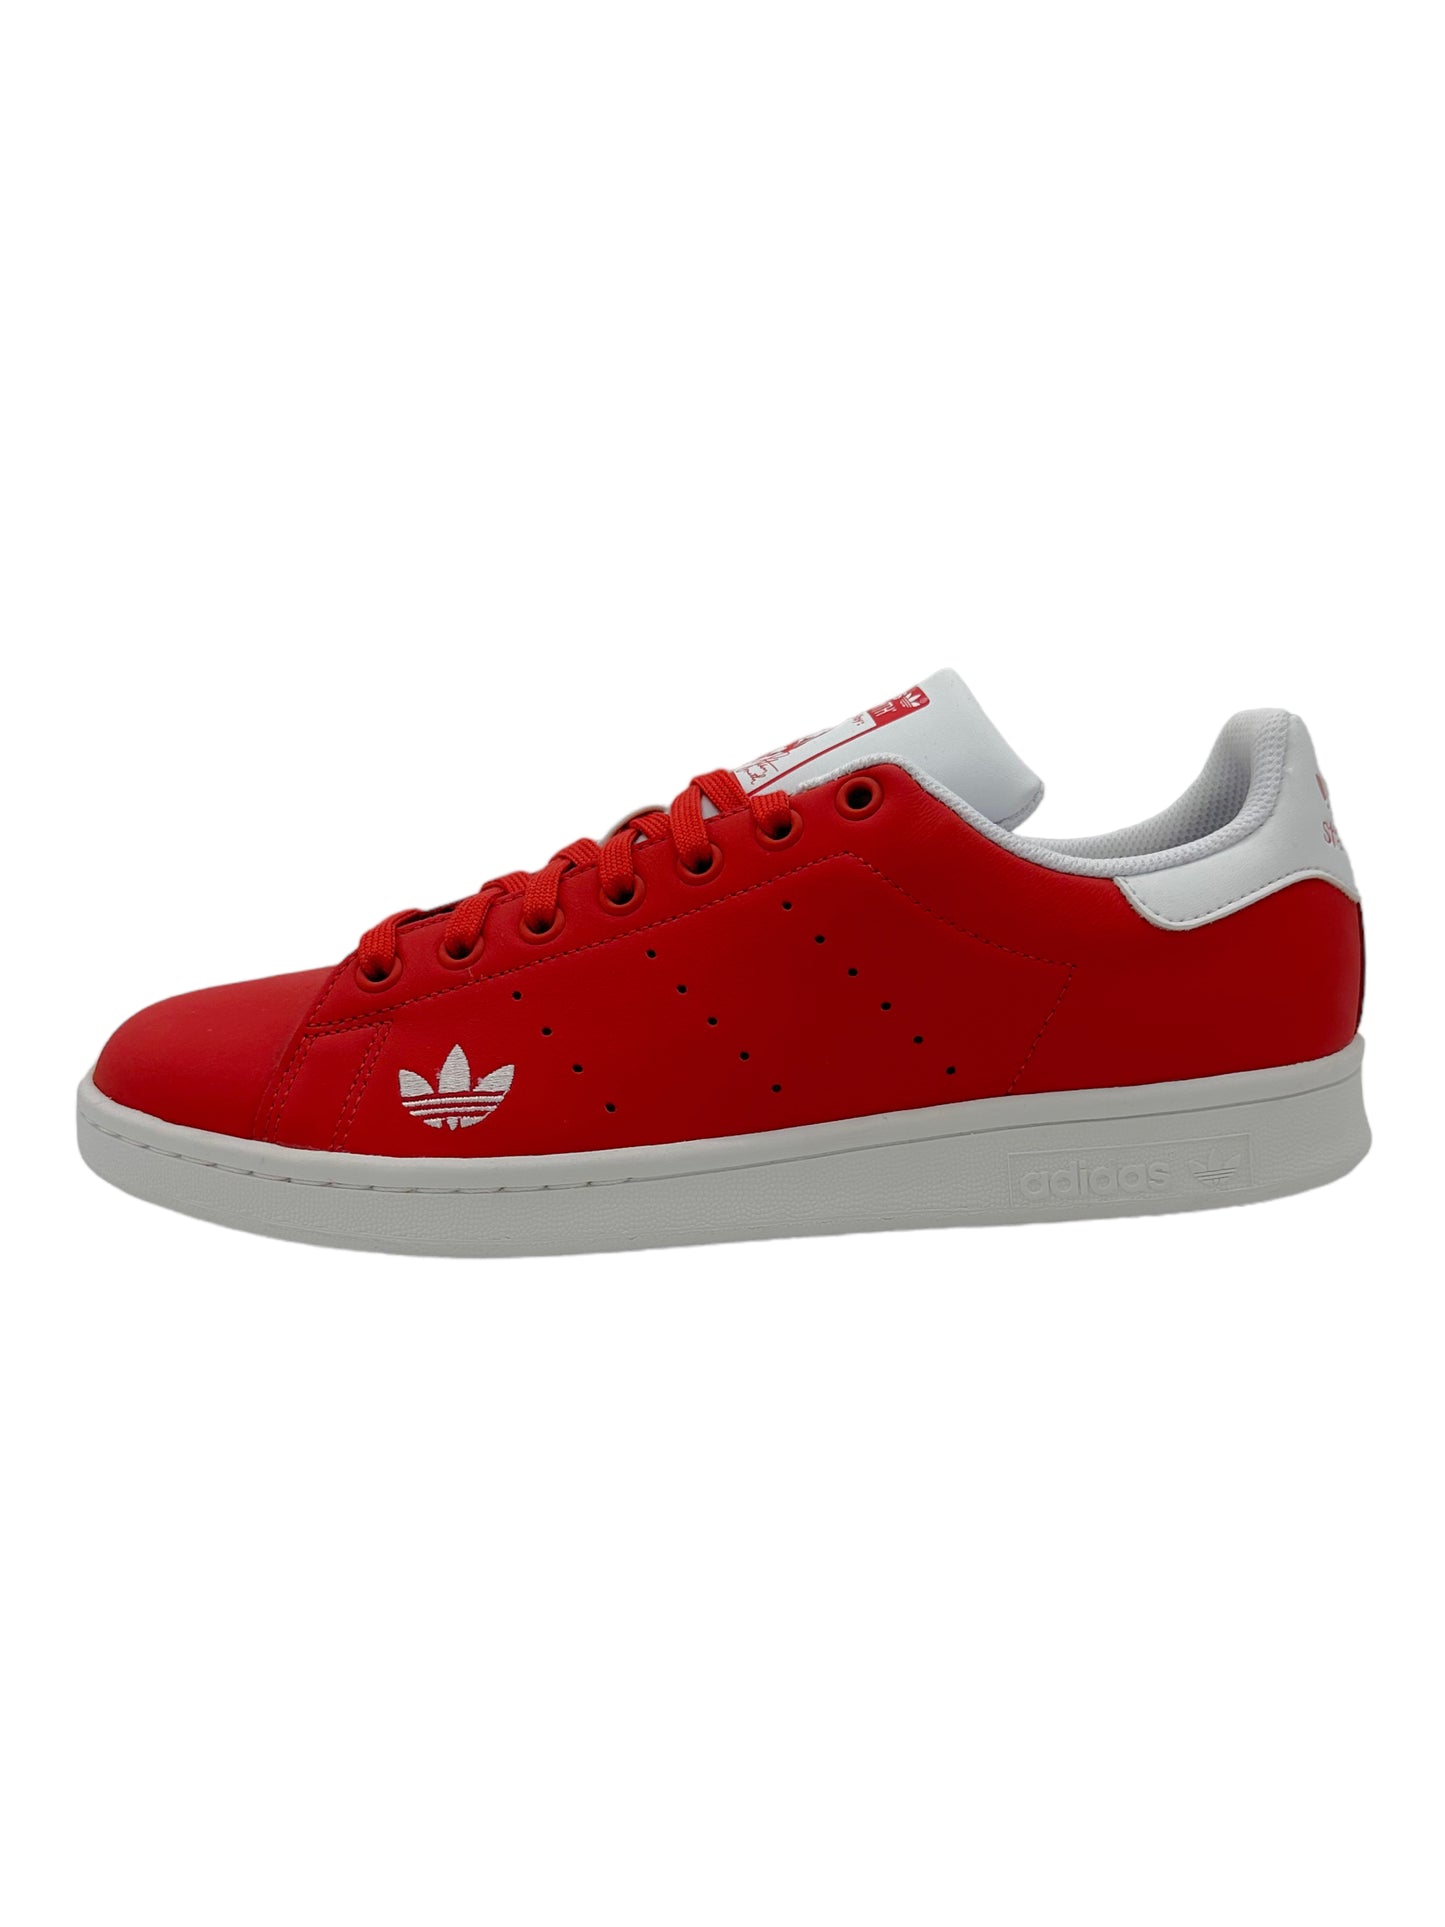 Adidas Stan Smith Red & White Sneakers - Genuine Design Luxury Consignment for Men. New & Pre-Owned Clothing, Shoes, & Accessories. Calgary, Canada